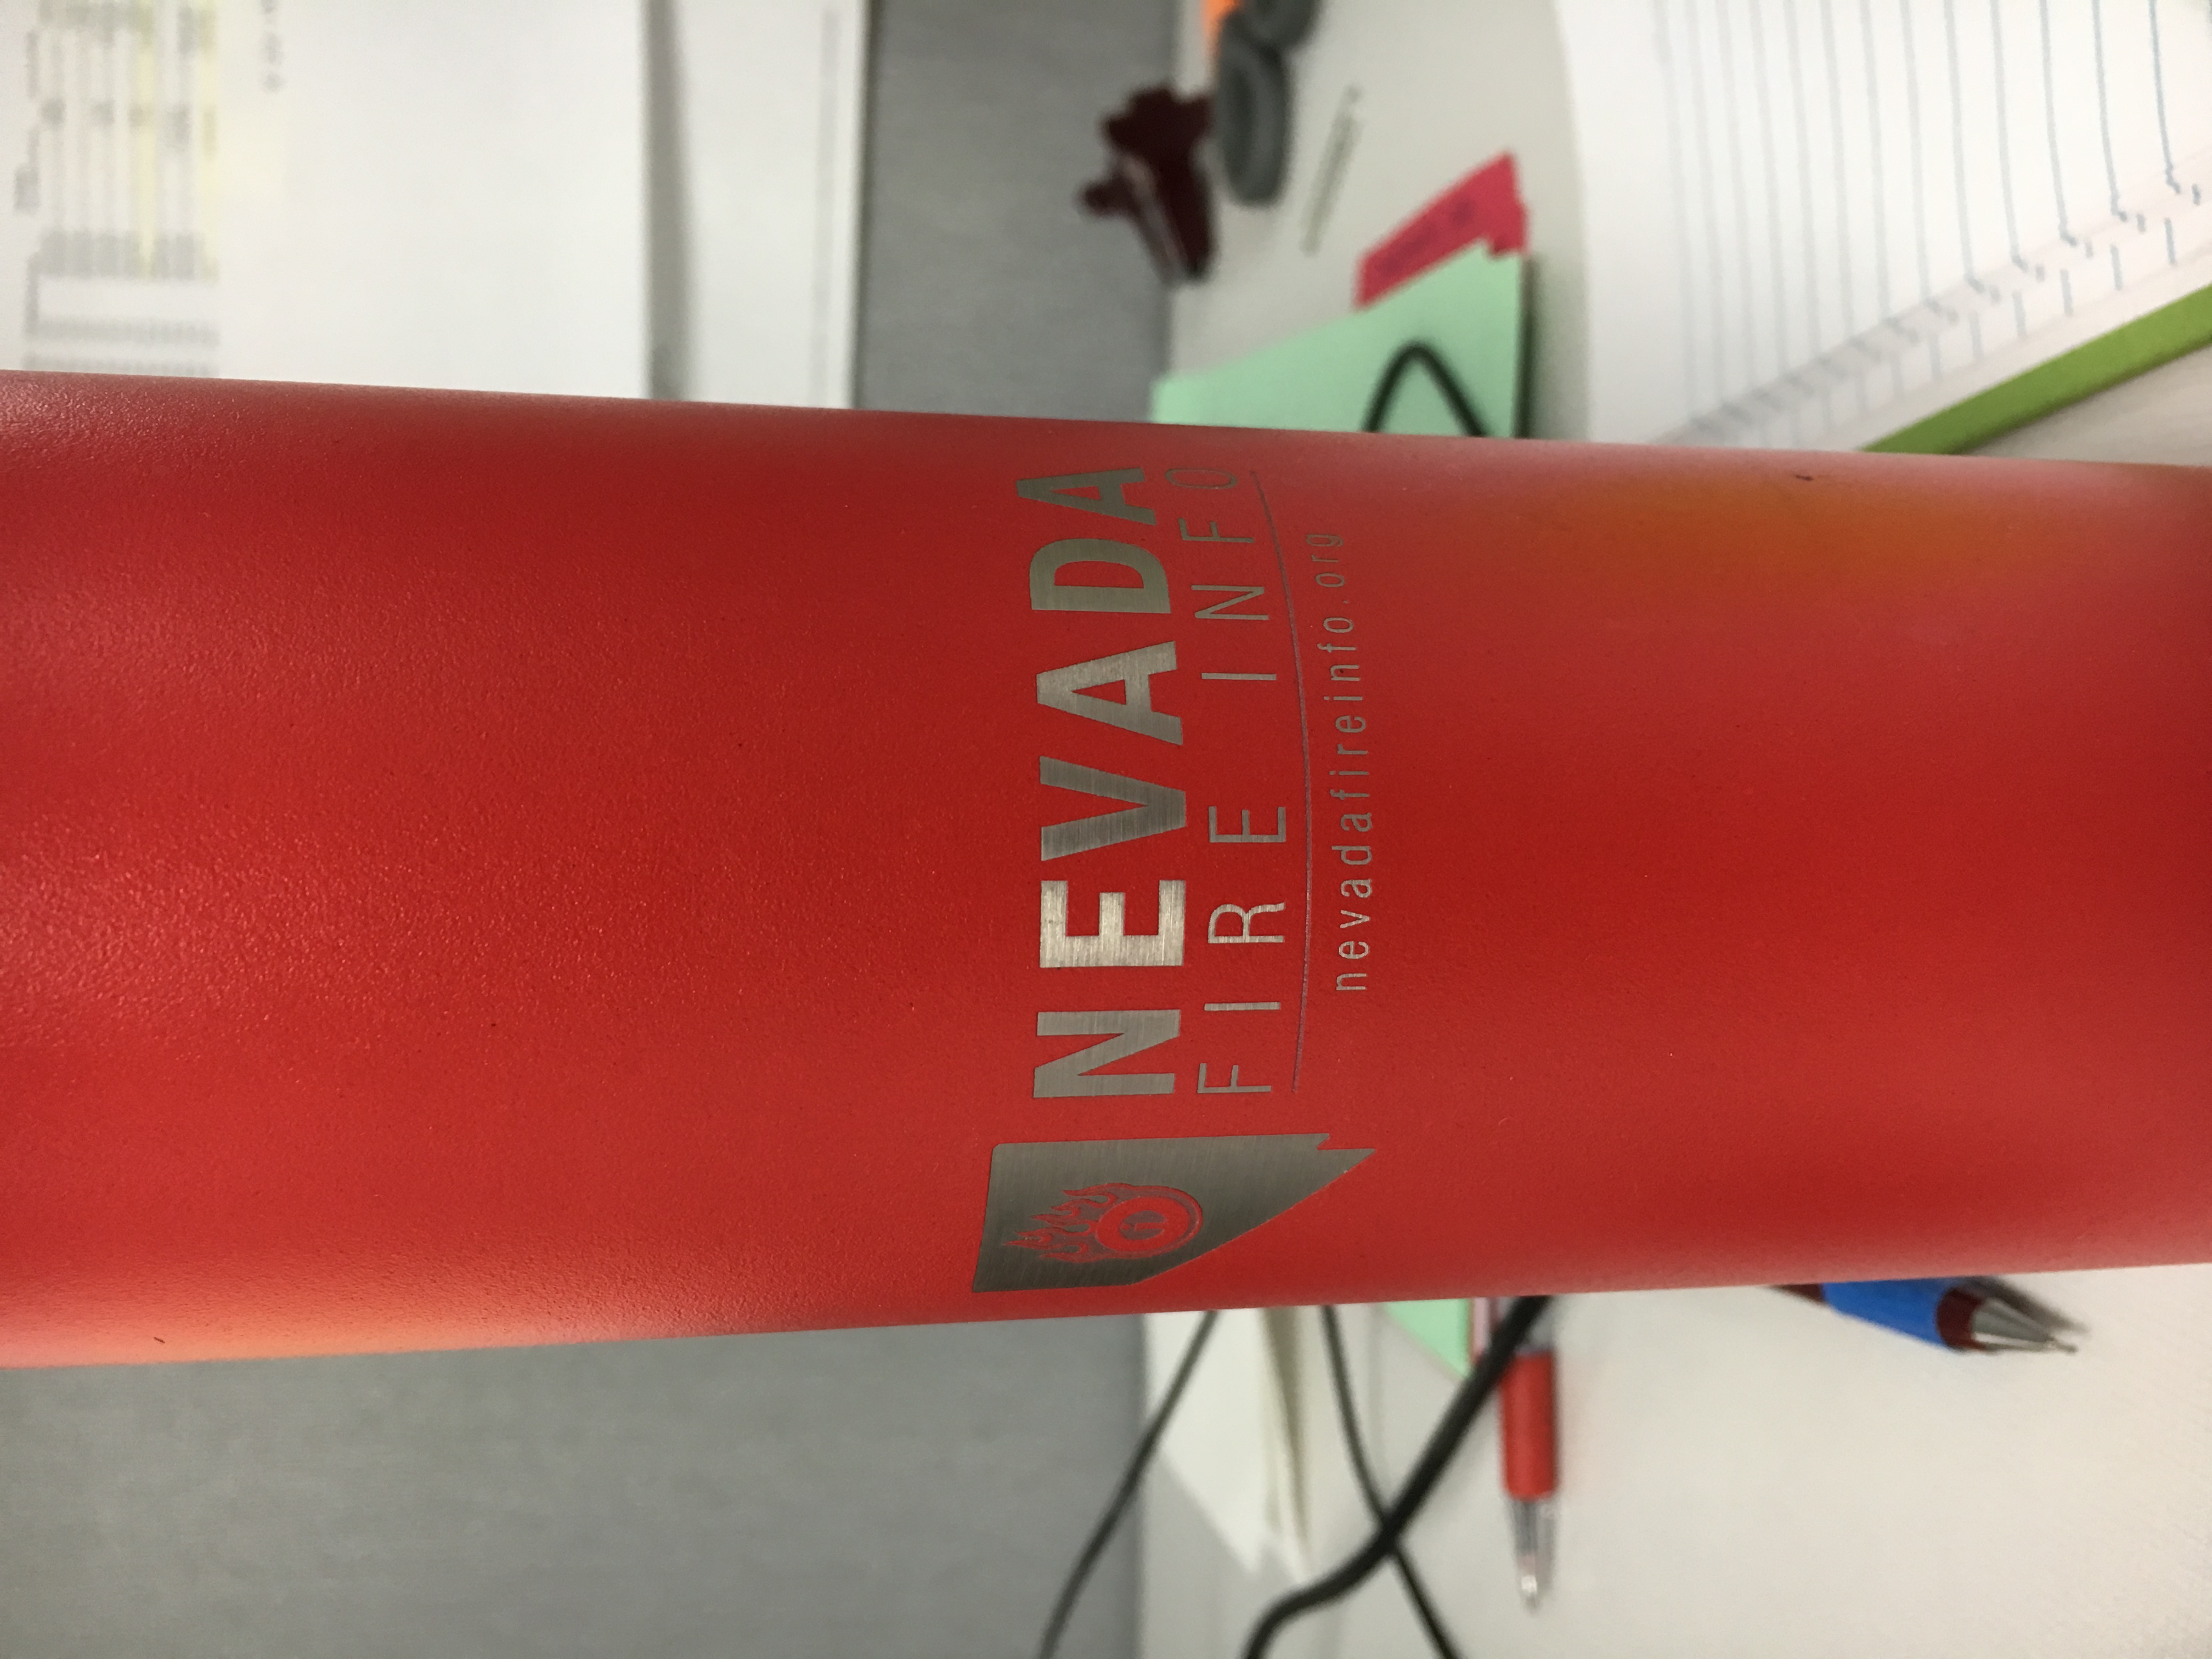 Photo of a red water bottle with the logo etched into the coating of the bottle